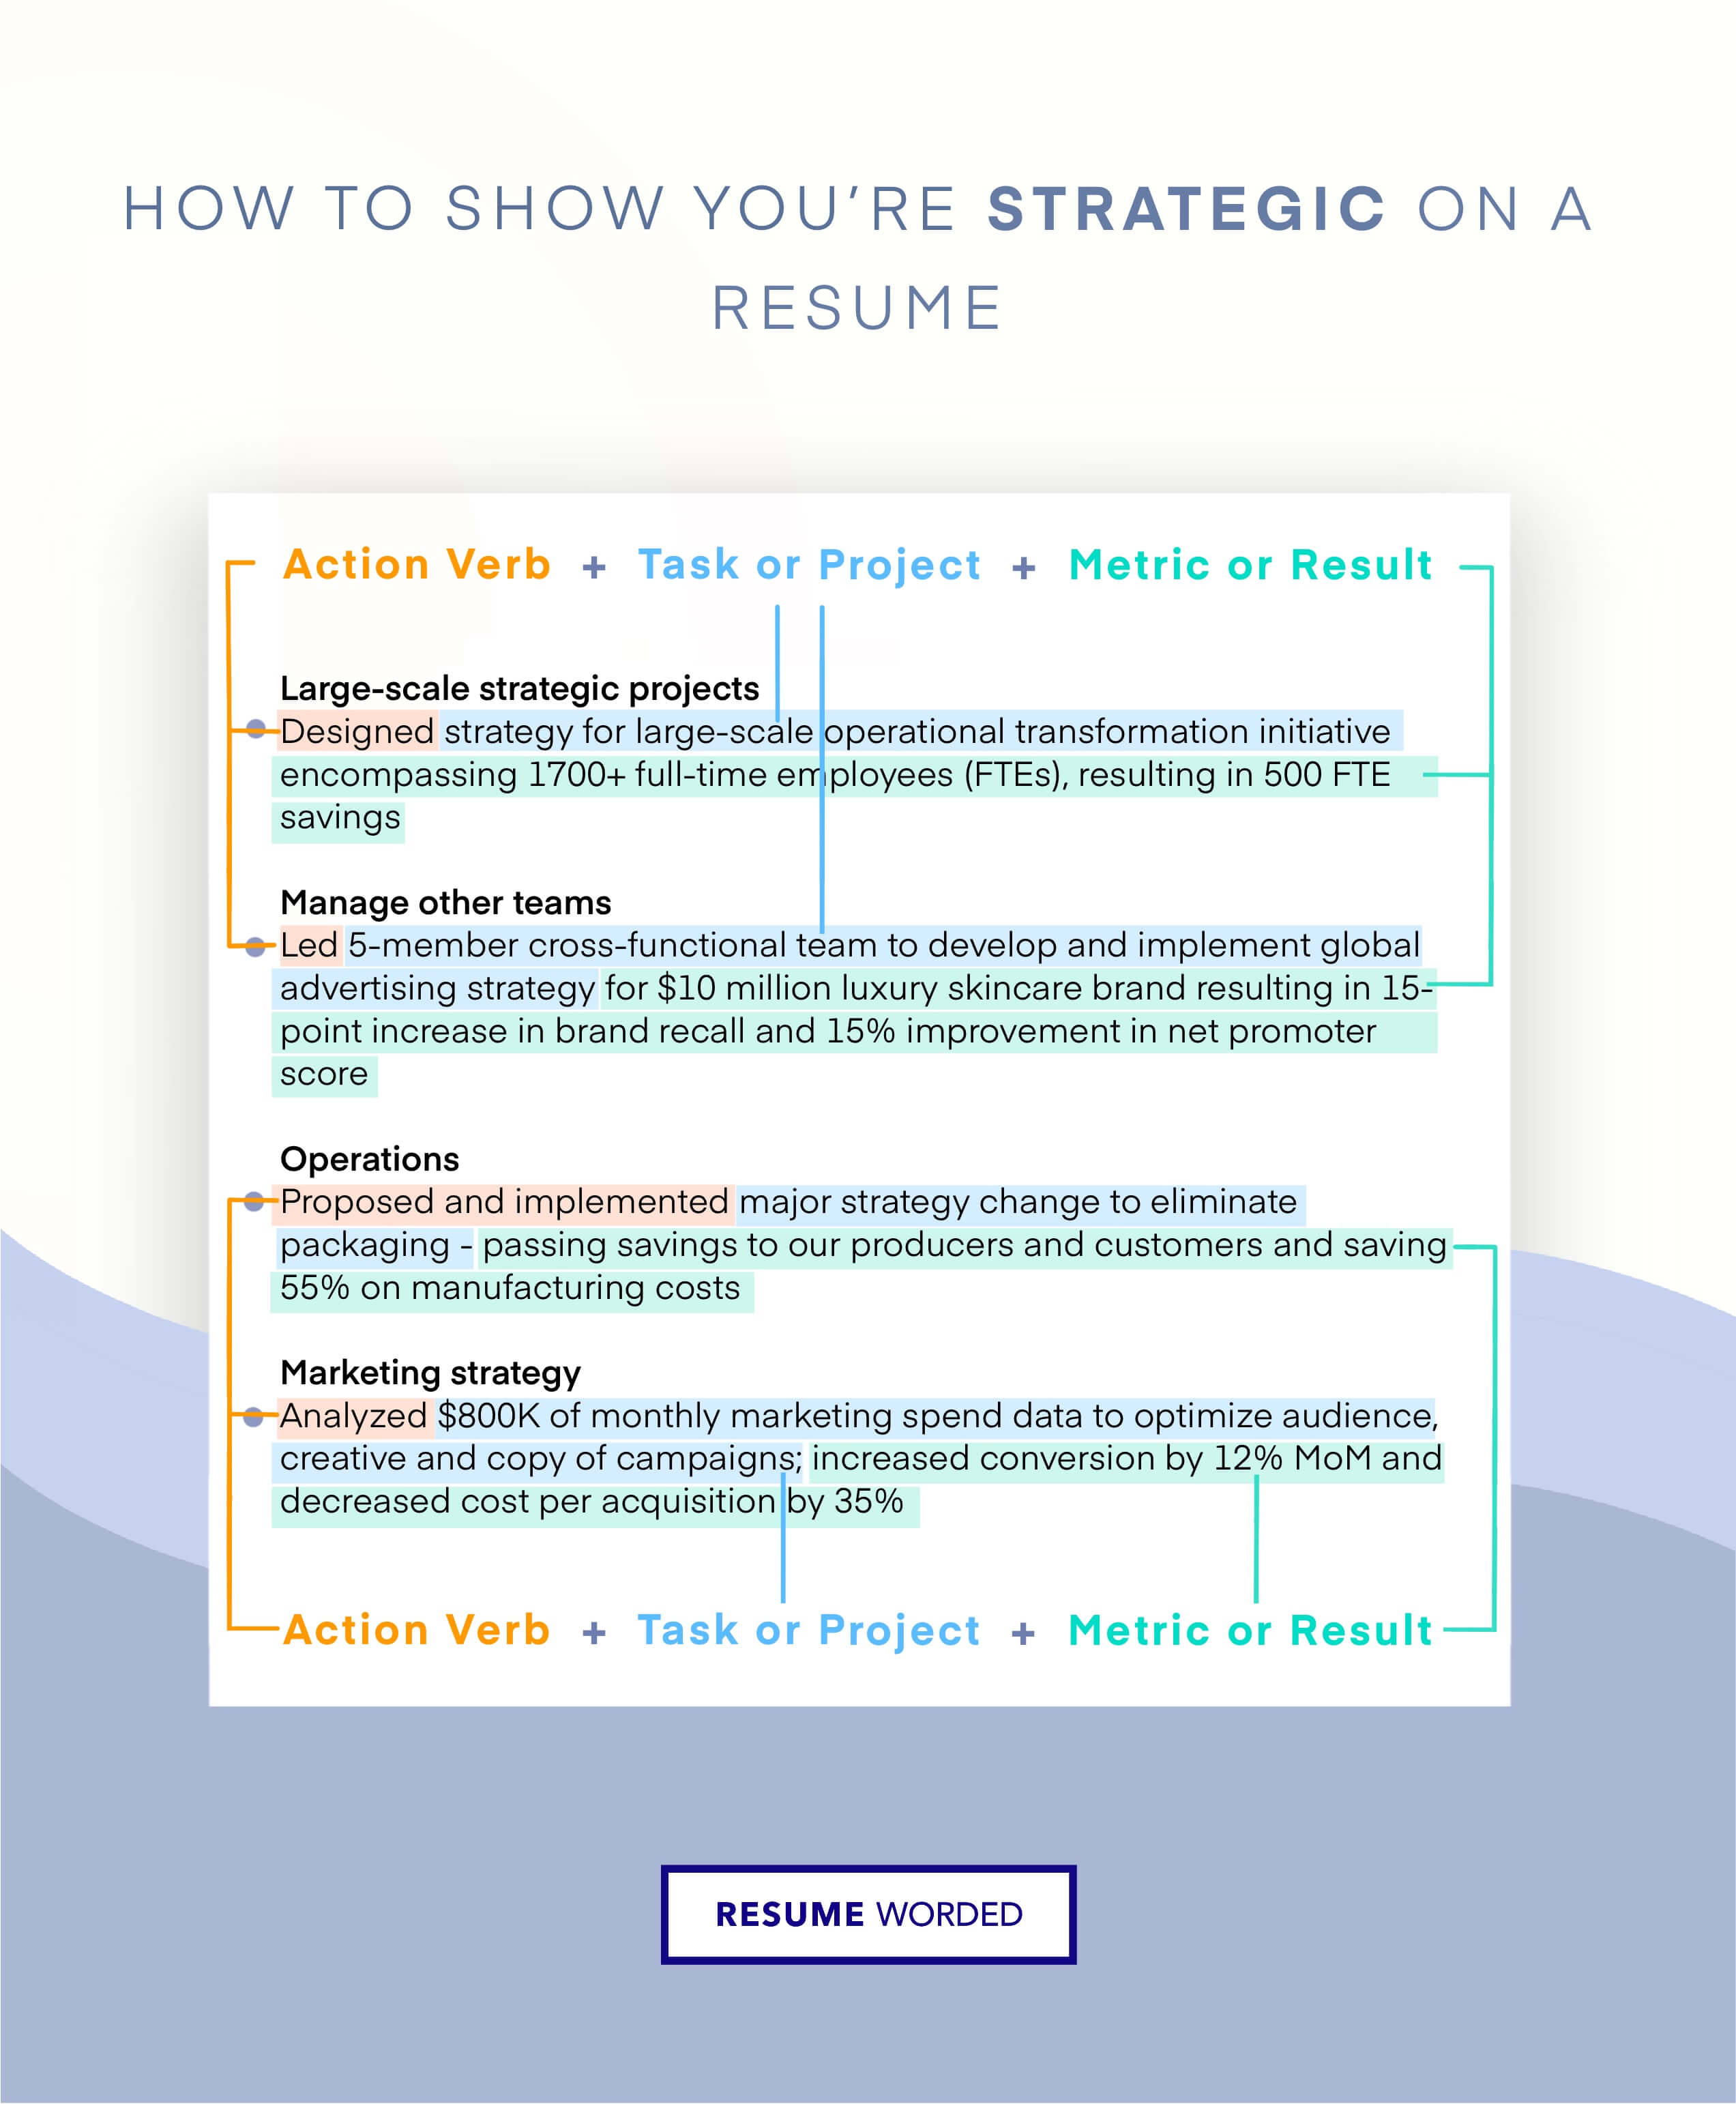 Emphasize your strategic vision - Learning and Development Manager CV